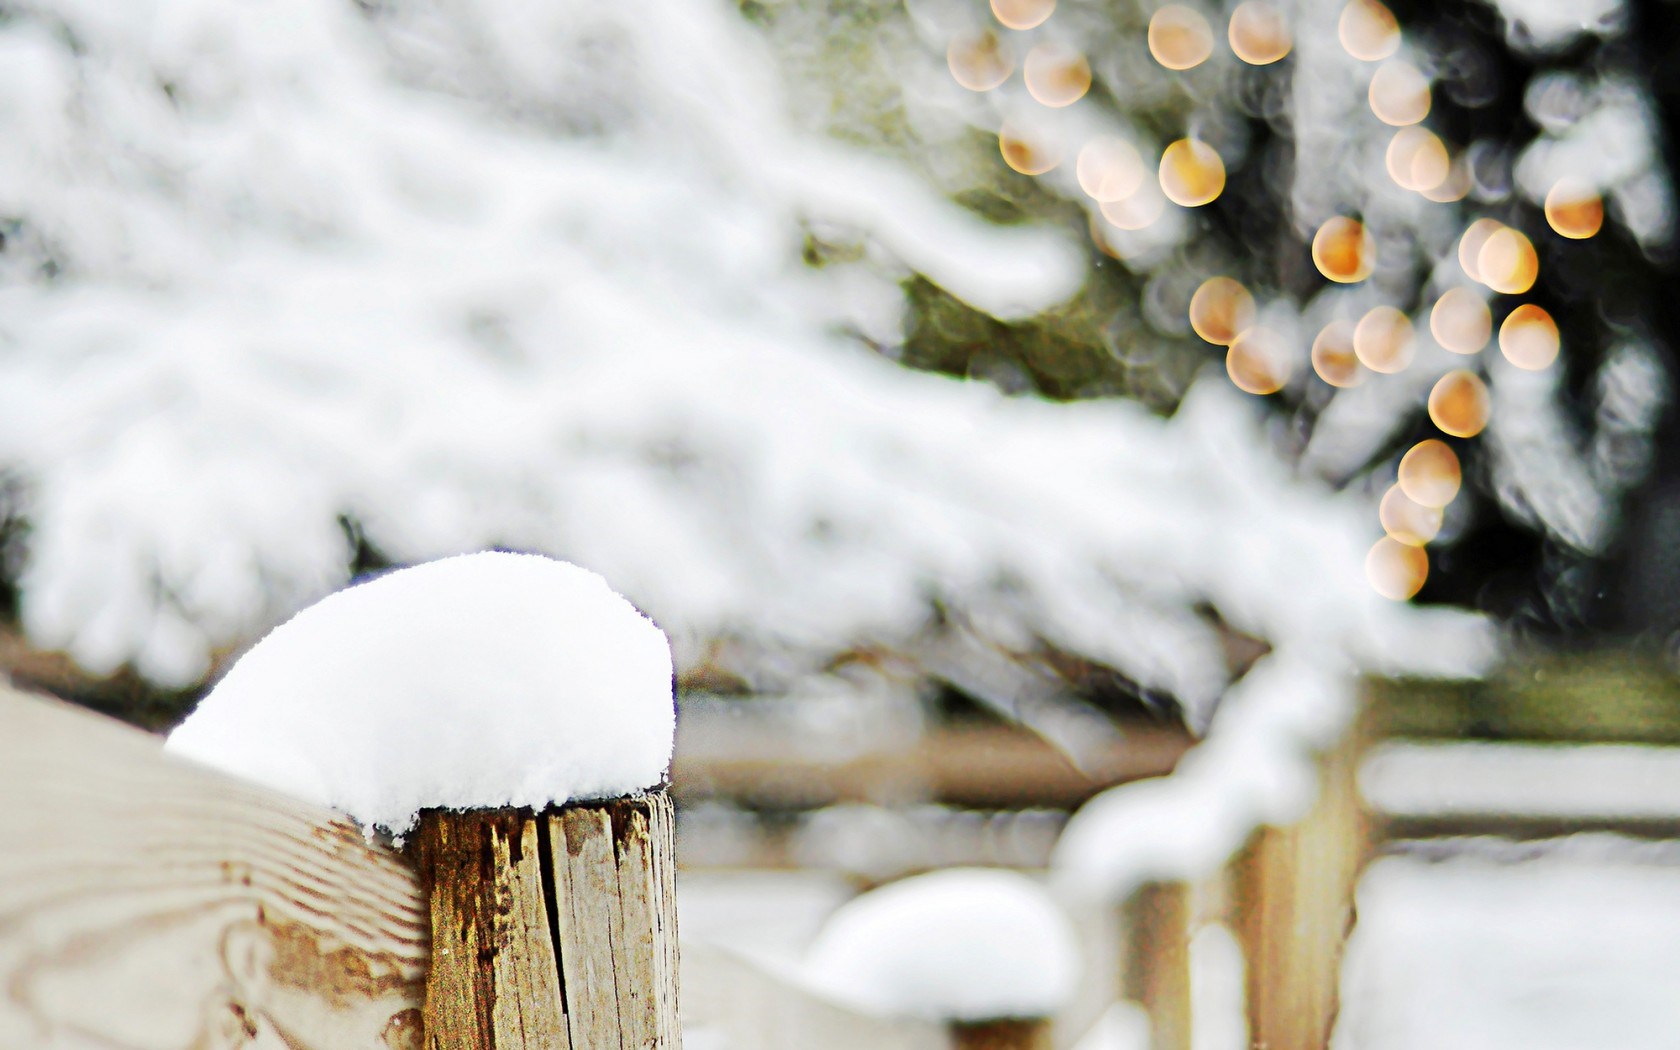 Fence Wood Snow Trees Branches Winter Bokeh Lights Christmas wallpaperx1050